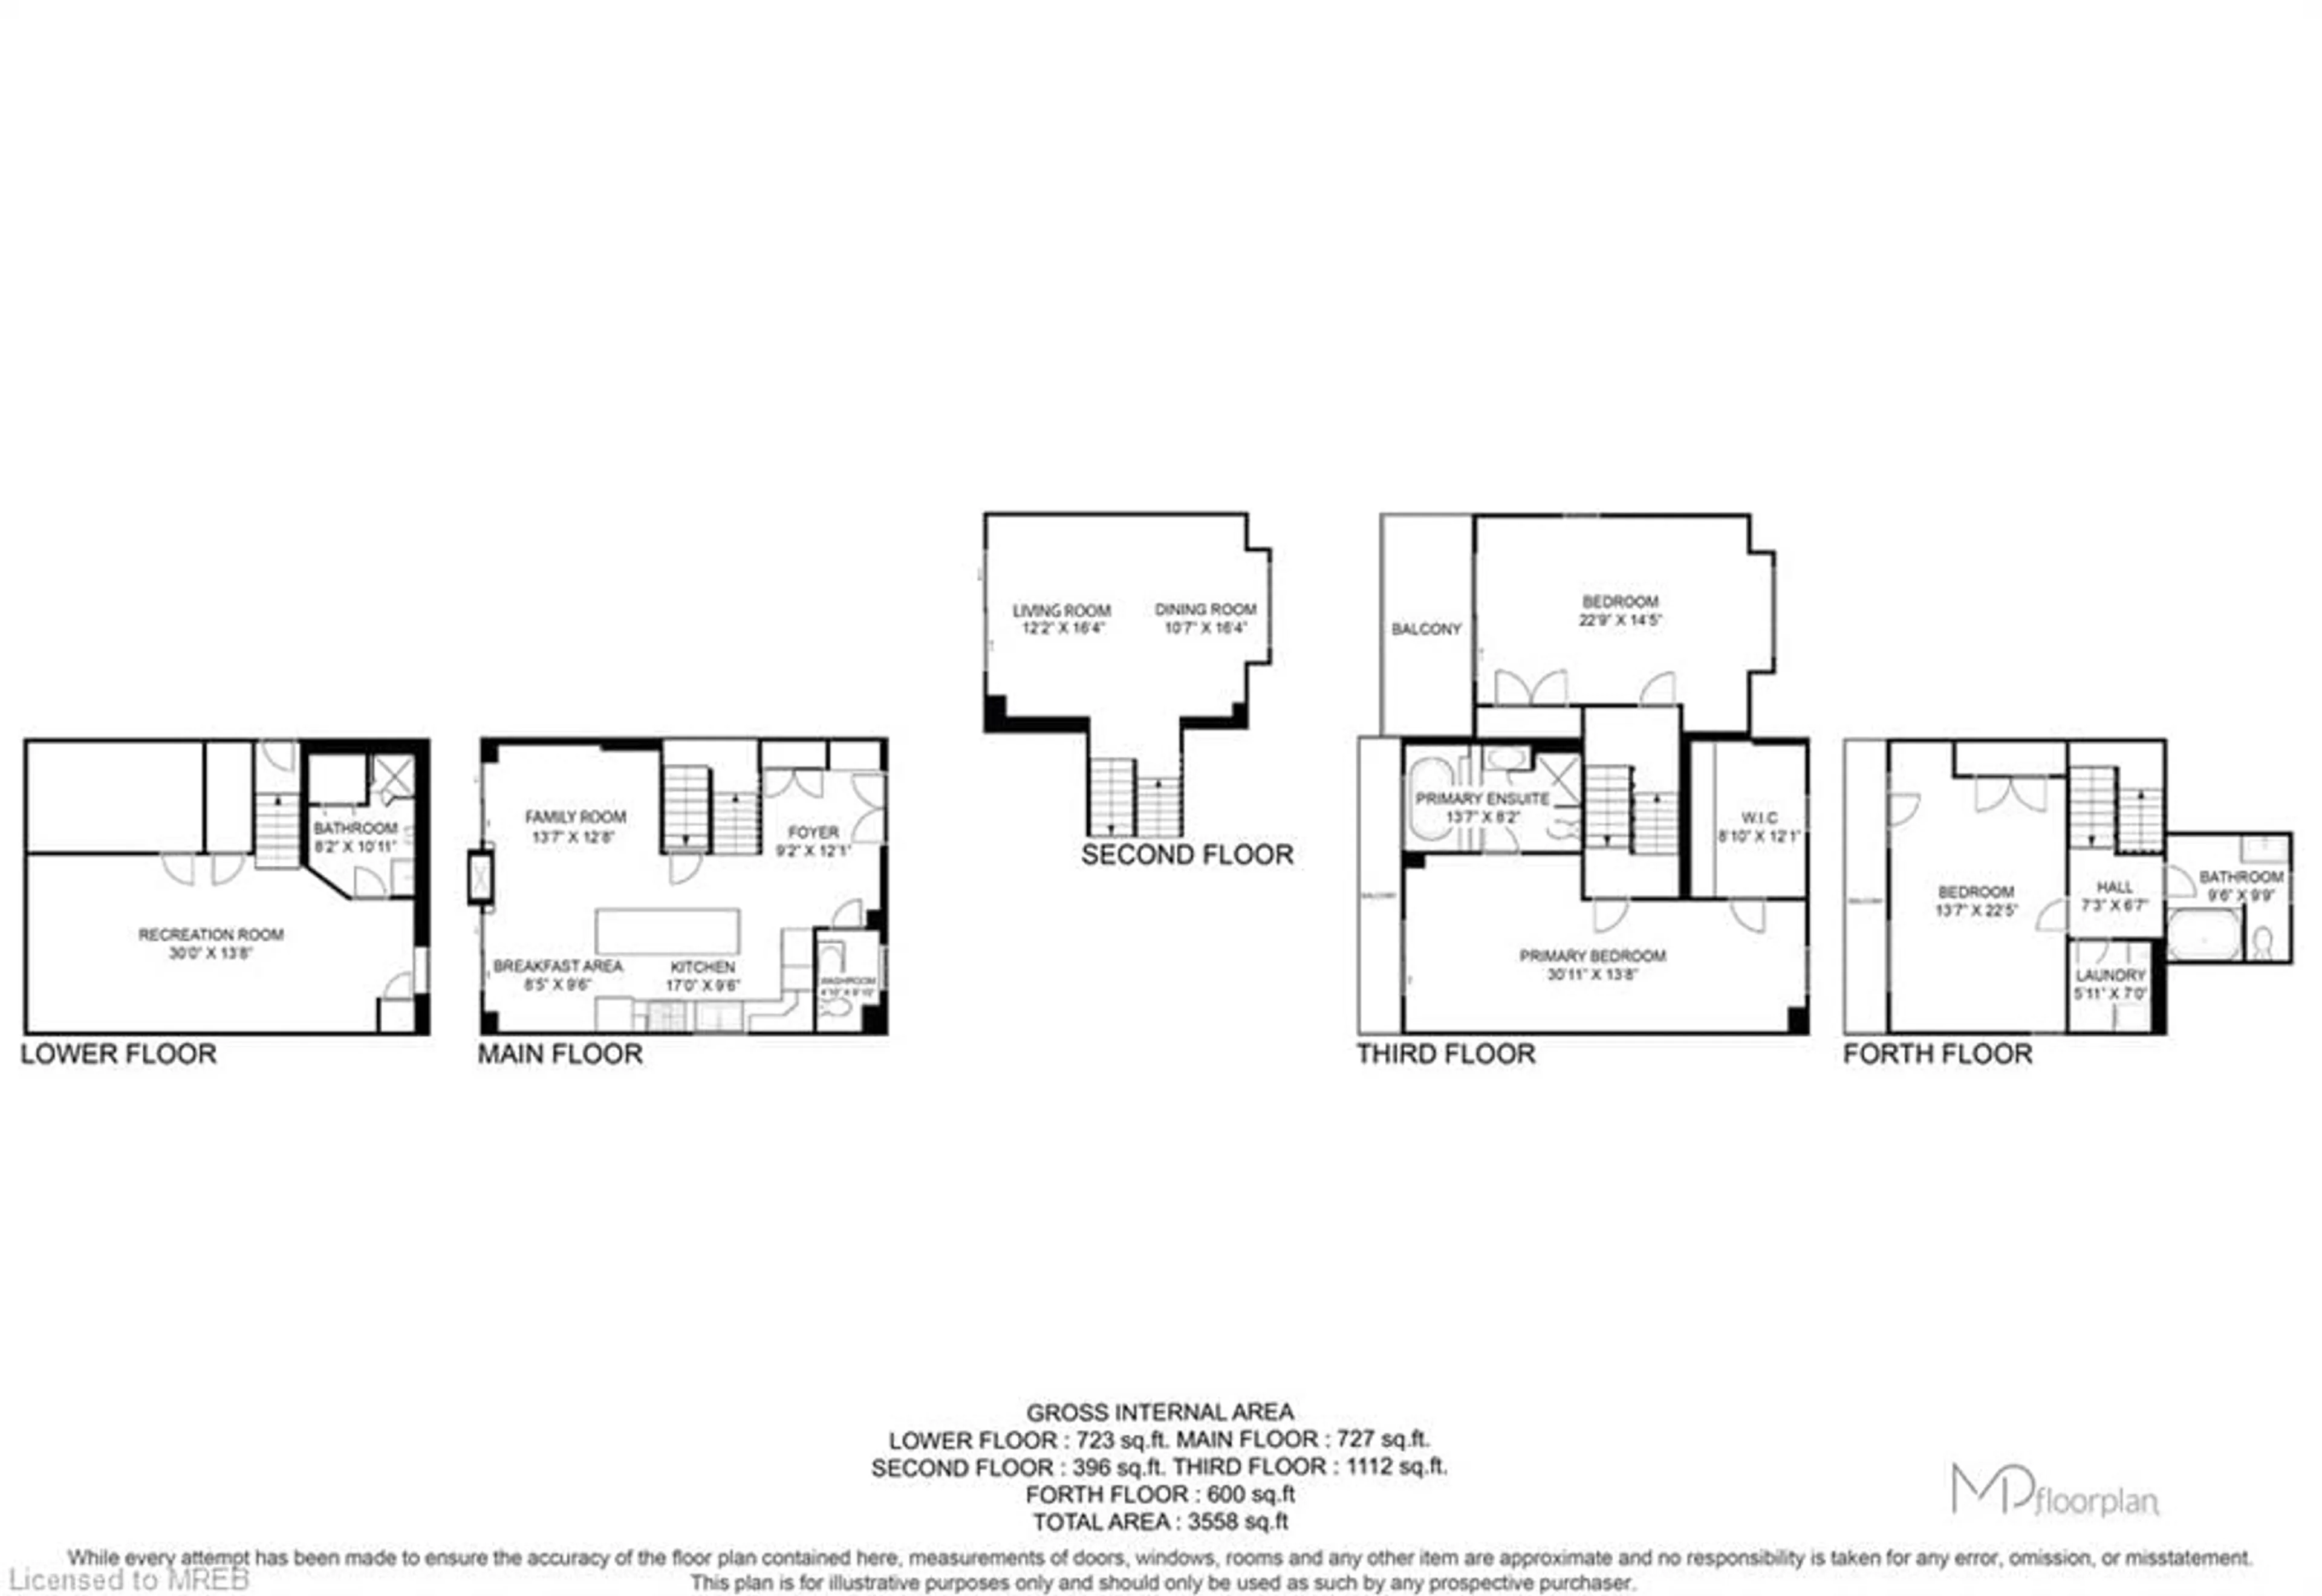 Floor plan for 53 Windemere Rd, Stoney Creek Ontario L8E 5G5